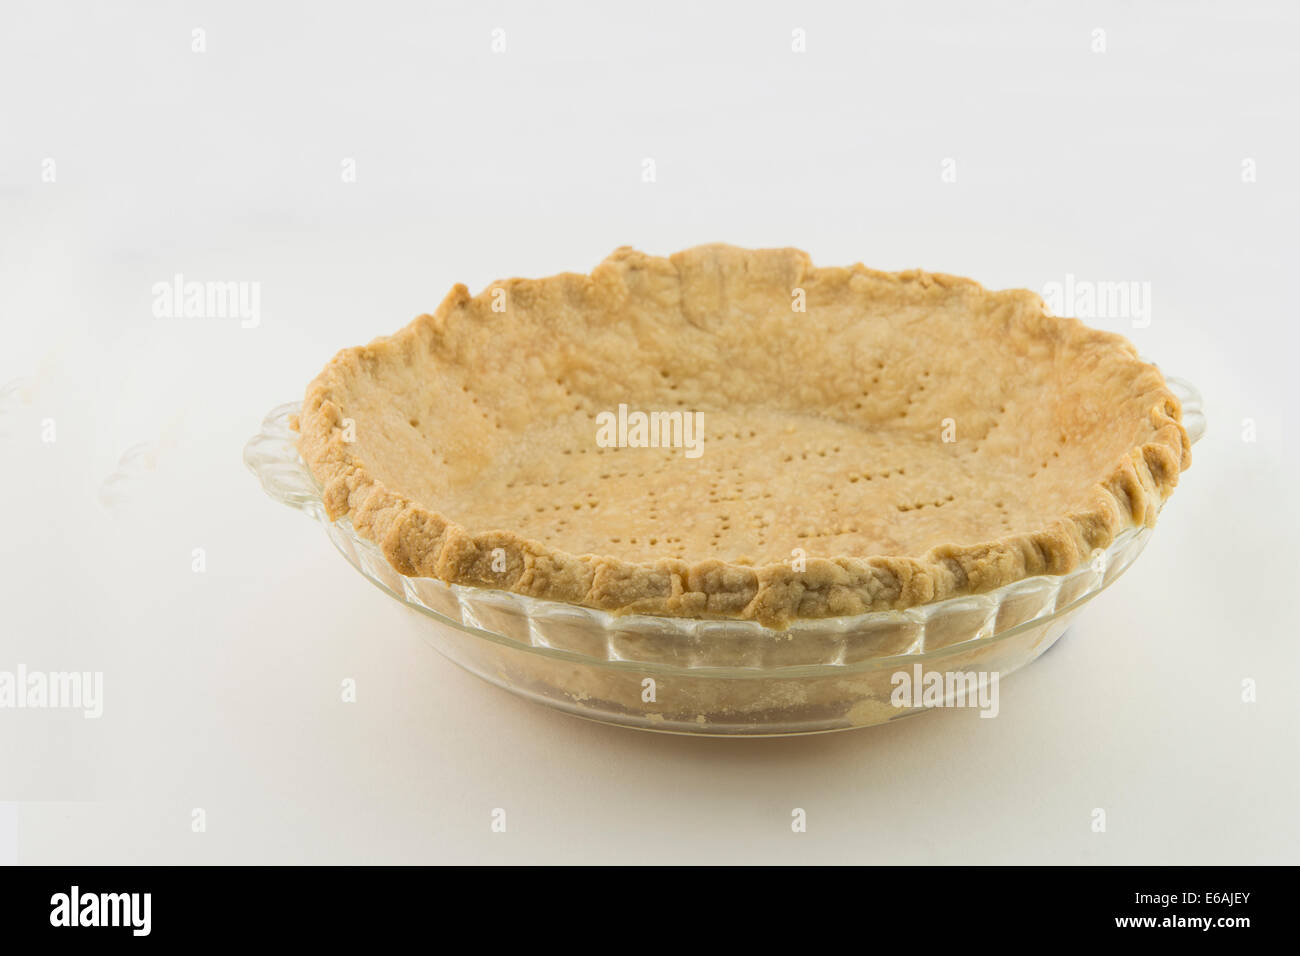 A browned, freshly baked homemade pie shell crust waiting for filling. Isolated on white. USA Stock Photo